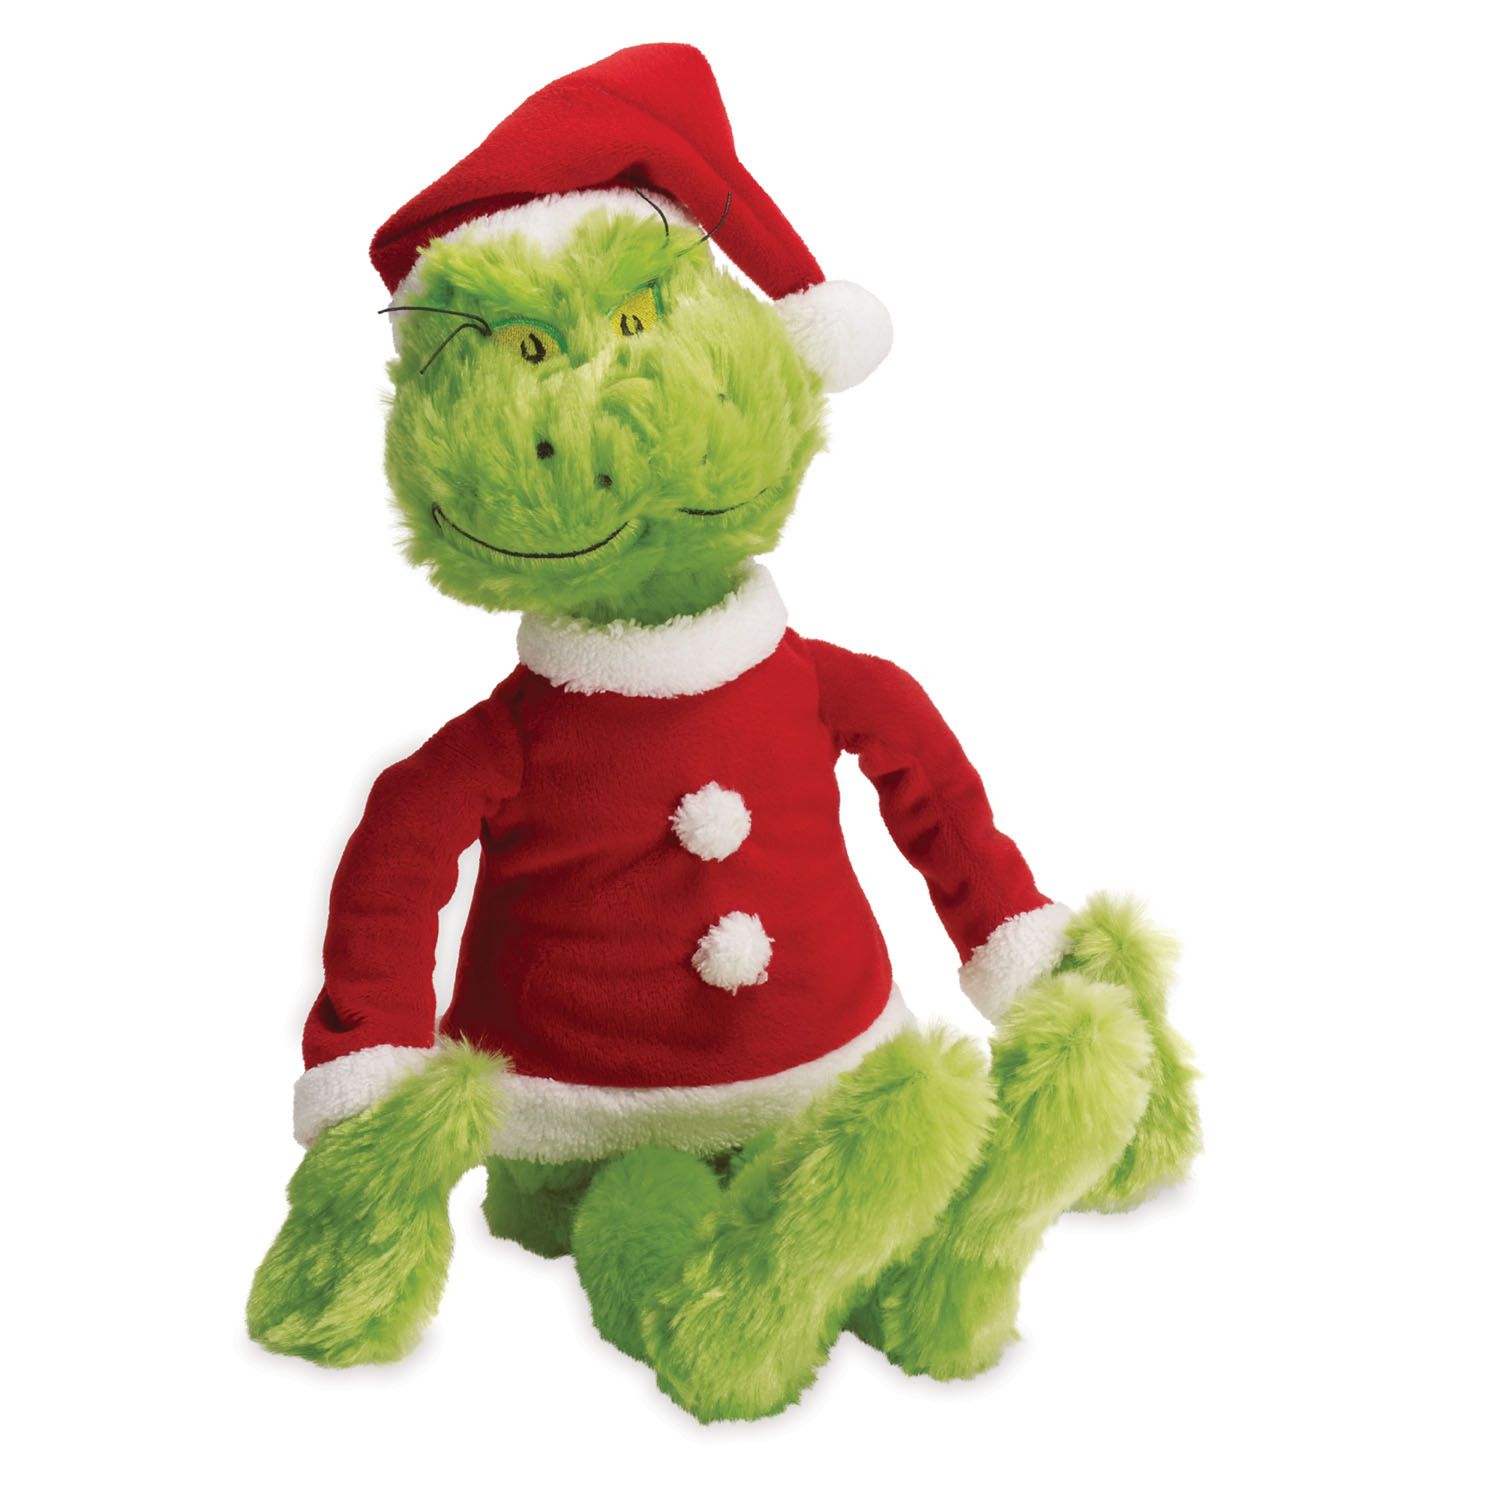 large grinch doll